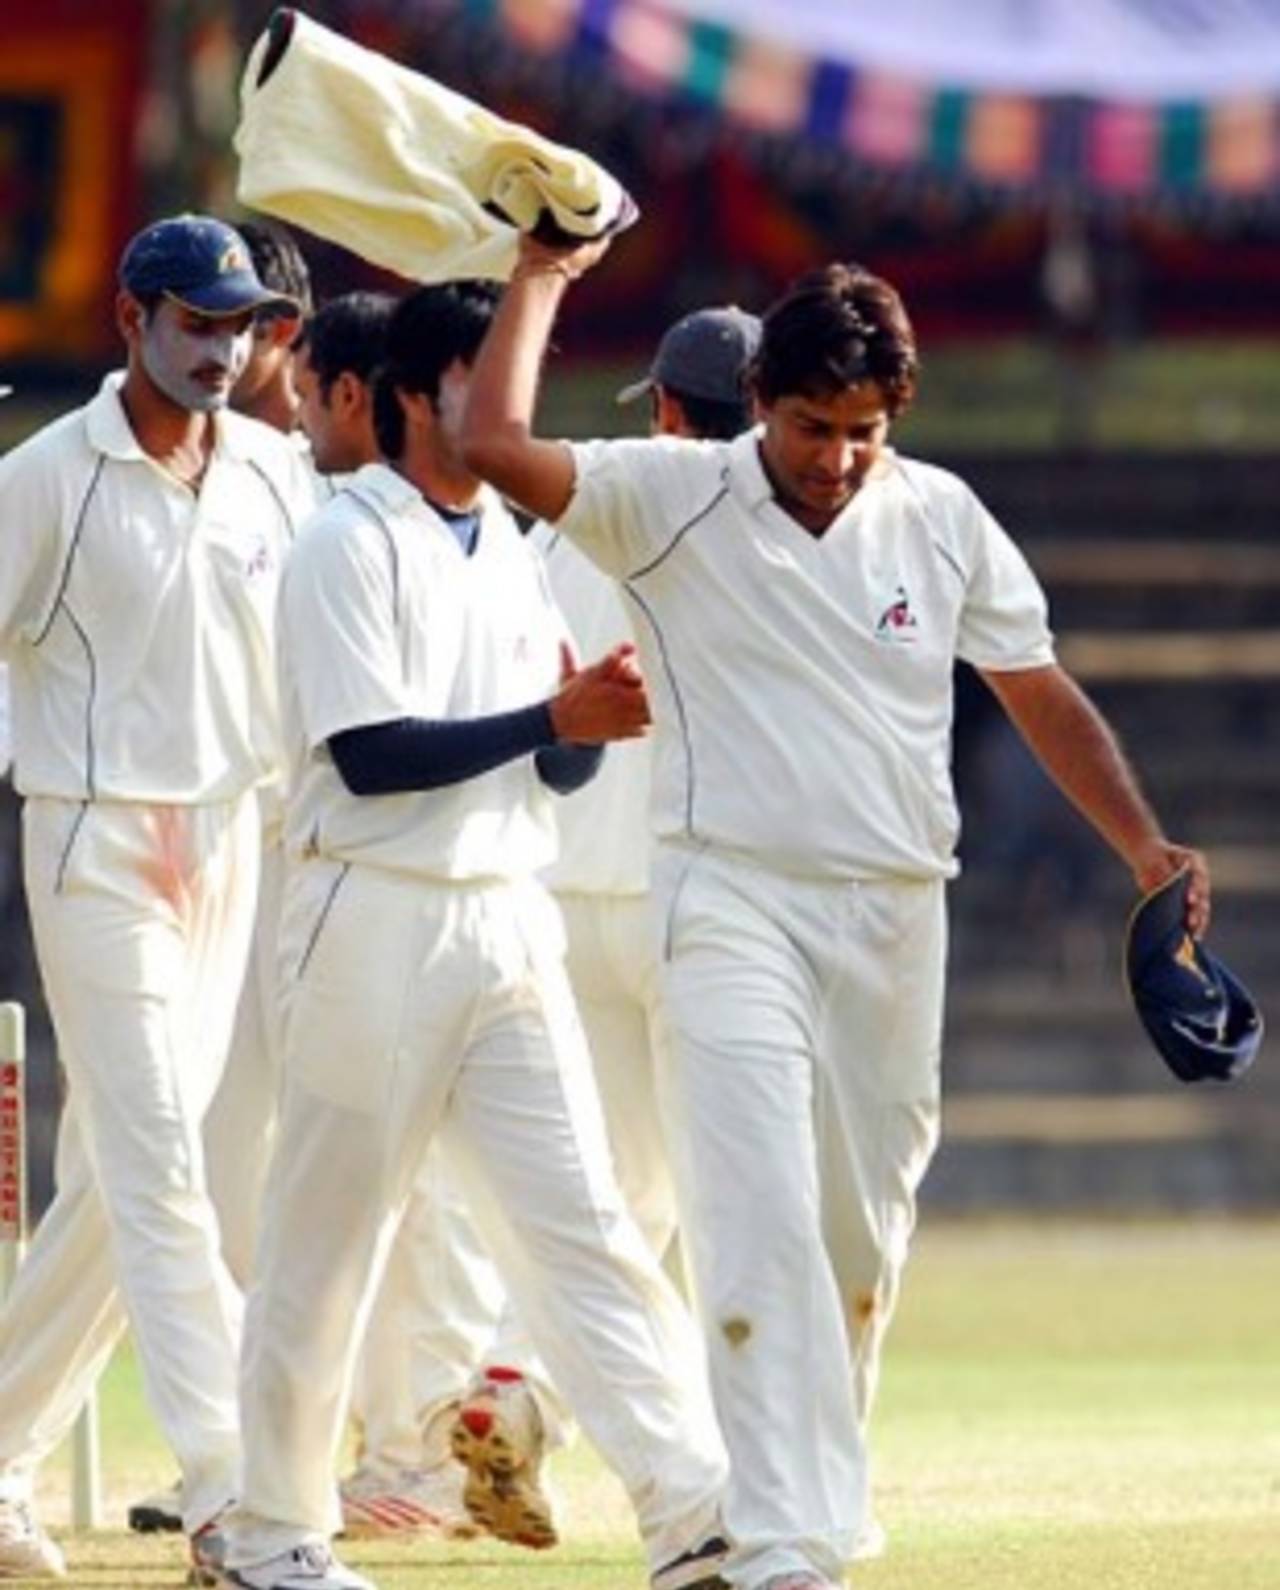 Mohammad Aslam leads his team off the field after Karnataka were bowled out for 329, Karnataka v Rajasthan, Ranji Trophy Super League, Group A, 4th round, 3rd day, Mysore, December 3, 2007